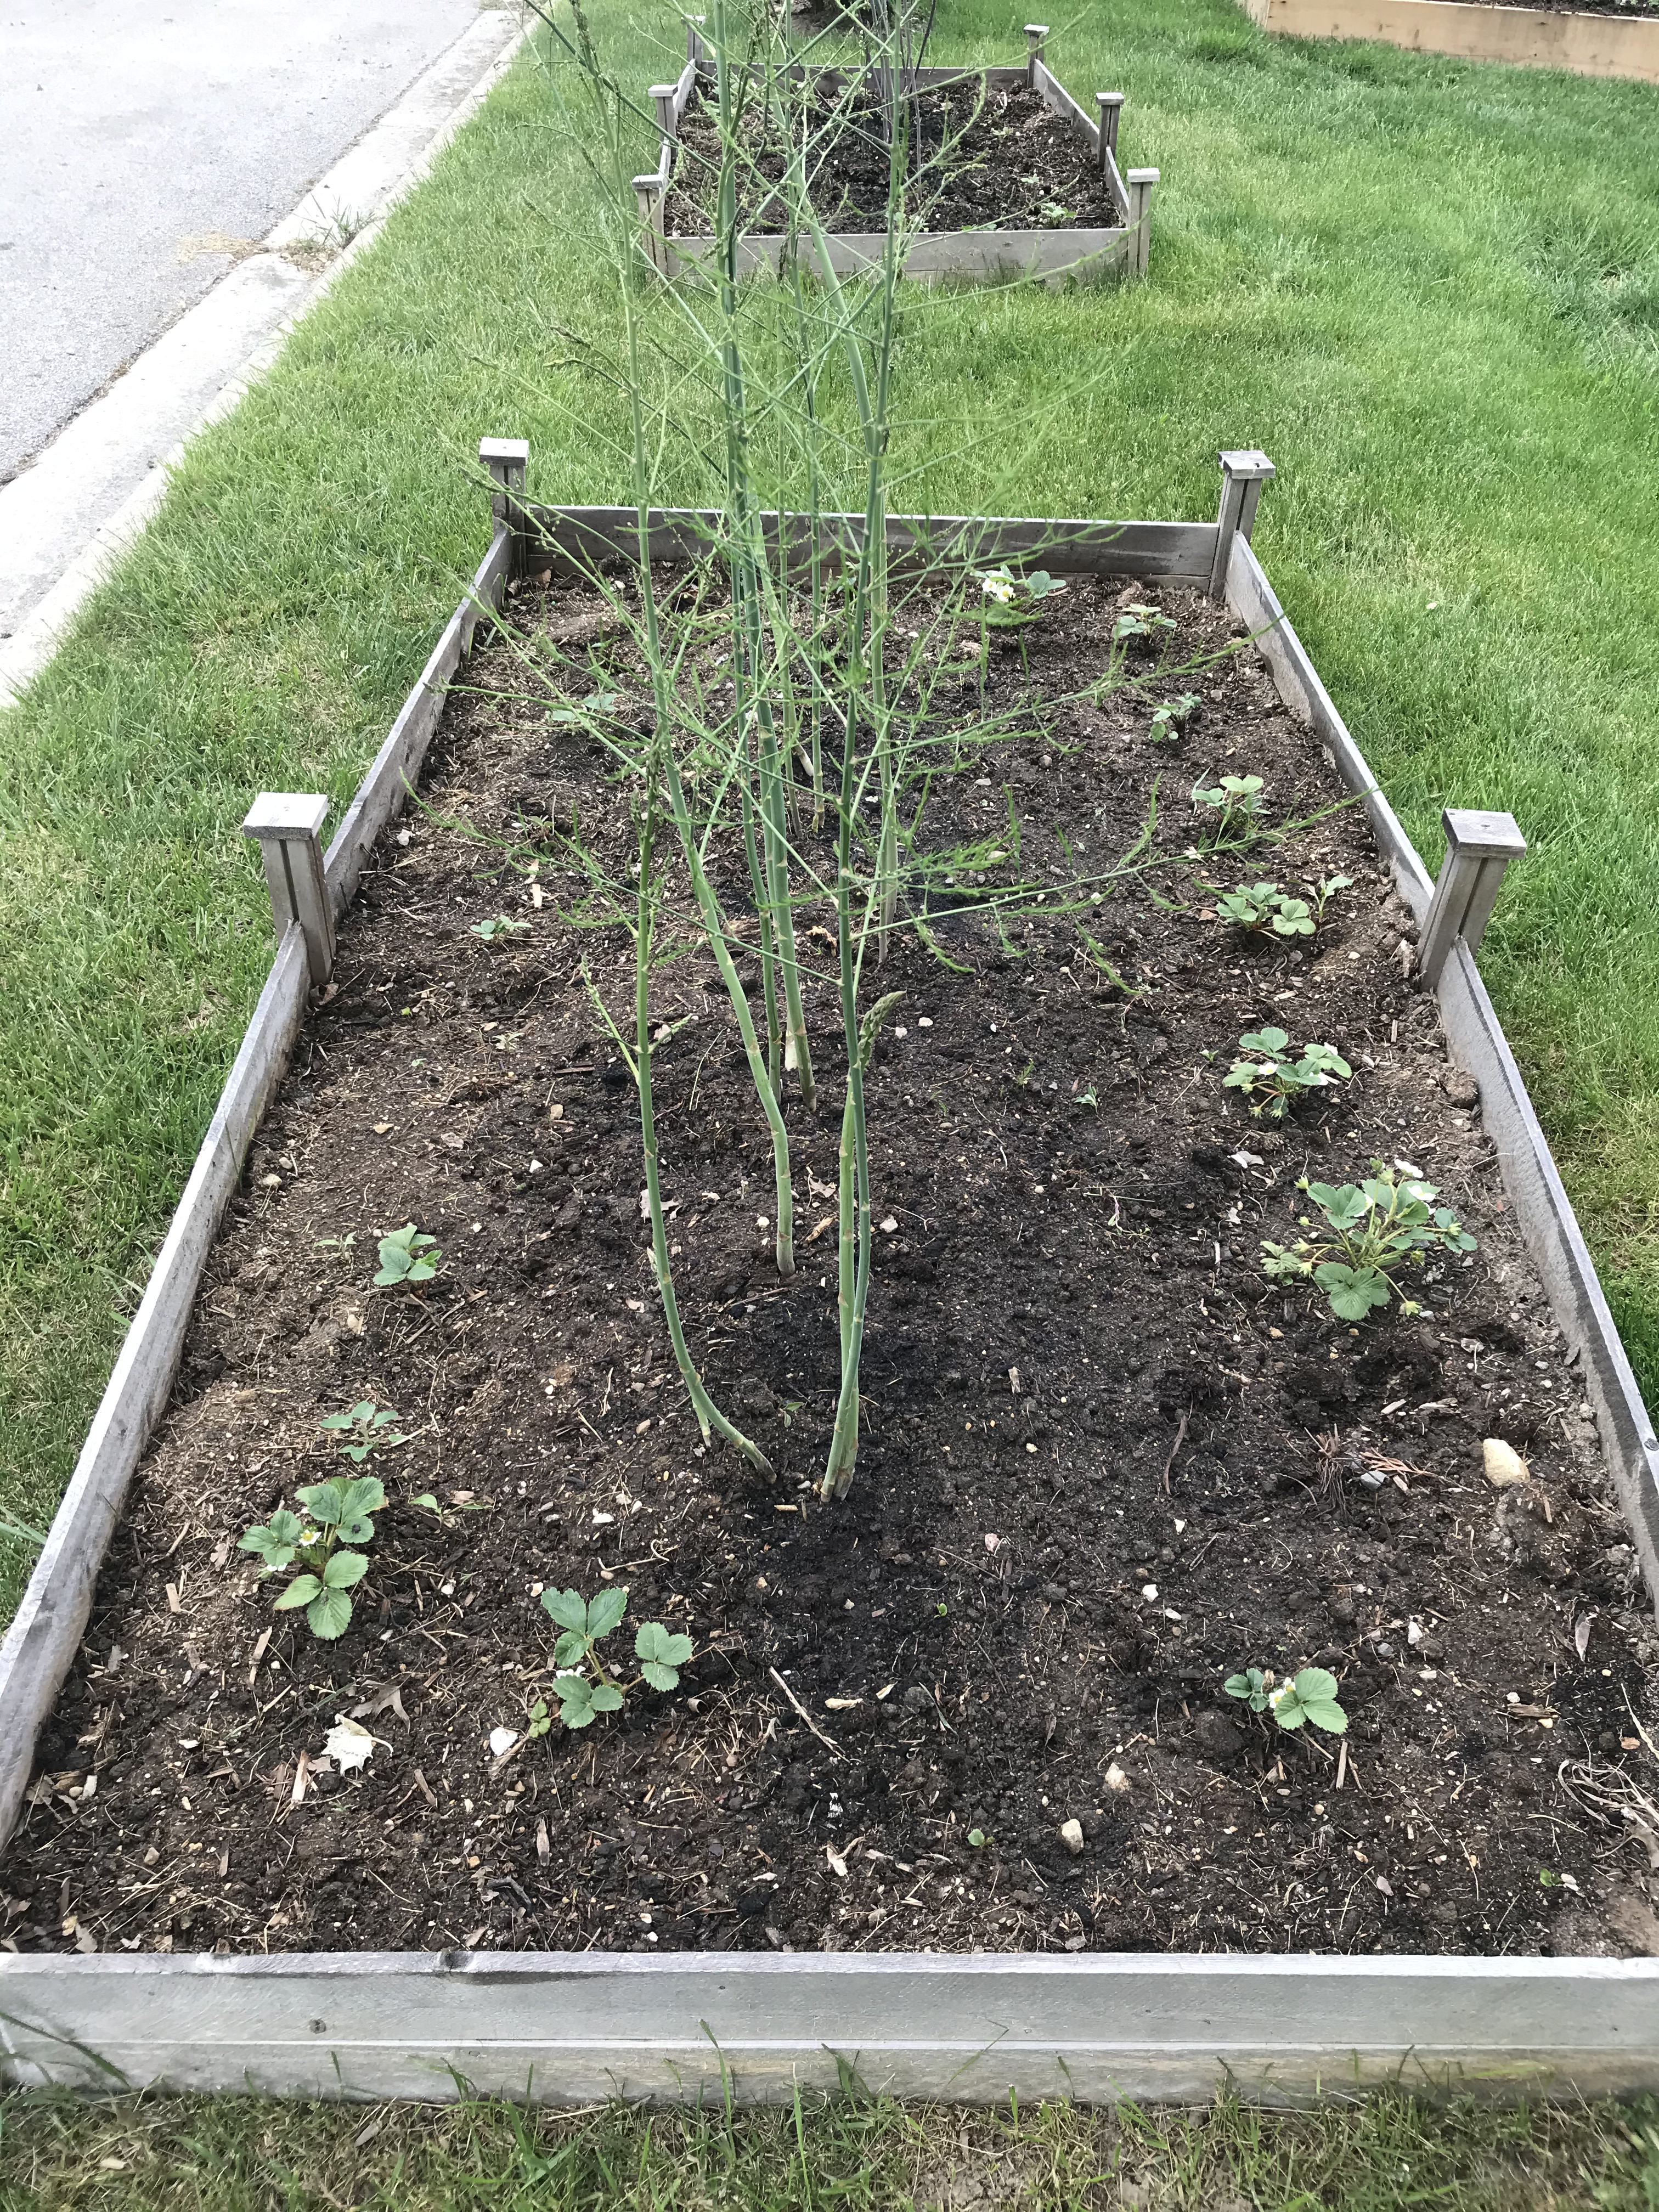 Second year asparagus with first year strawberries in the perimeter